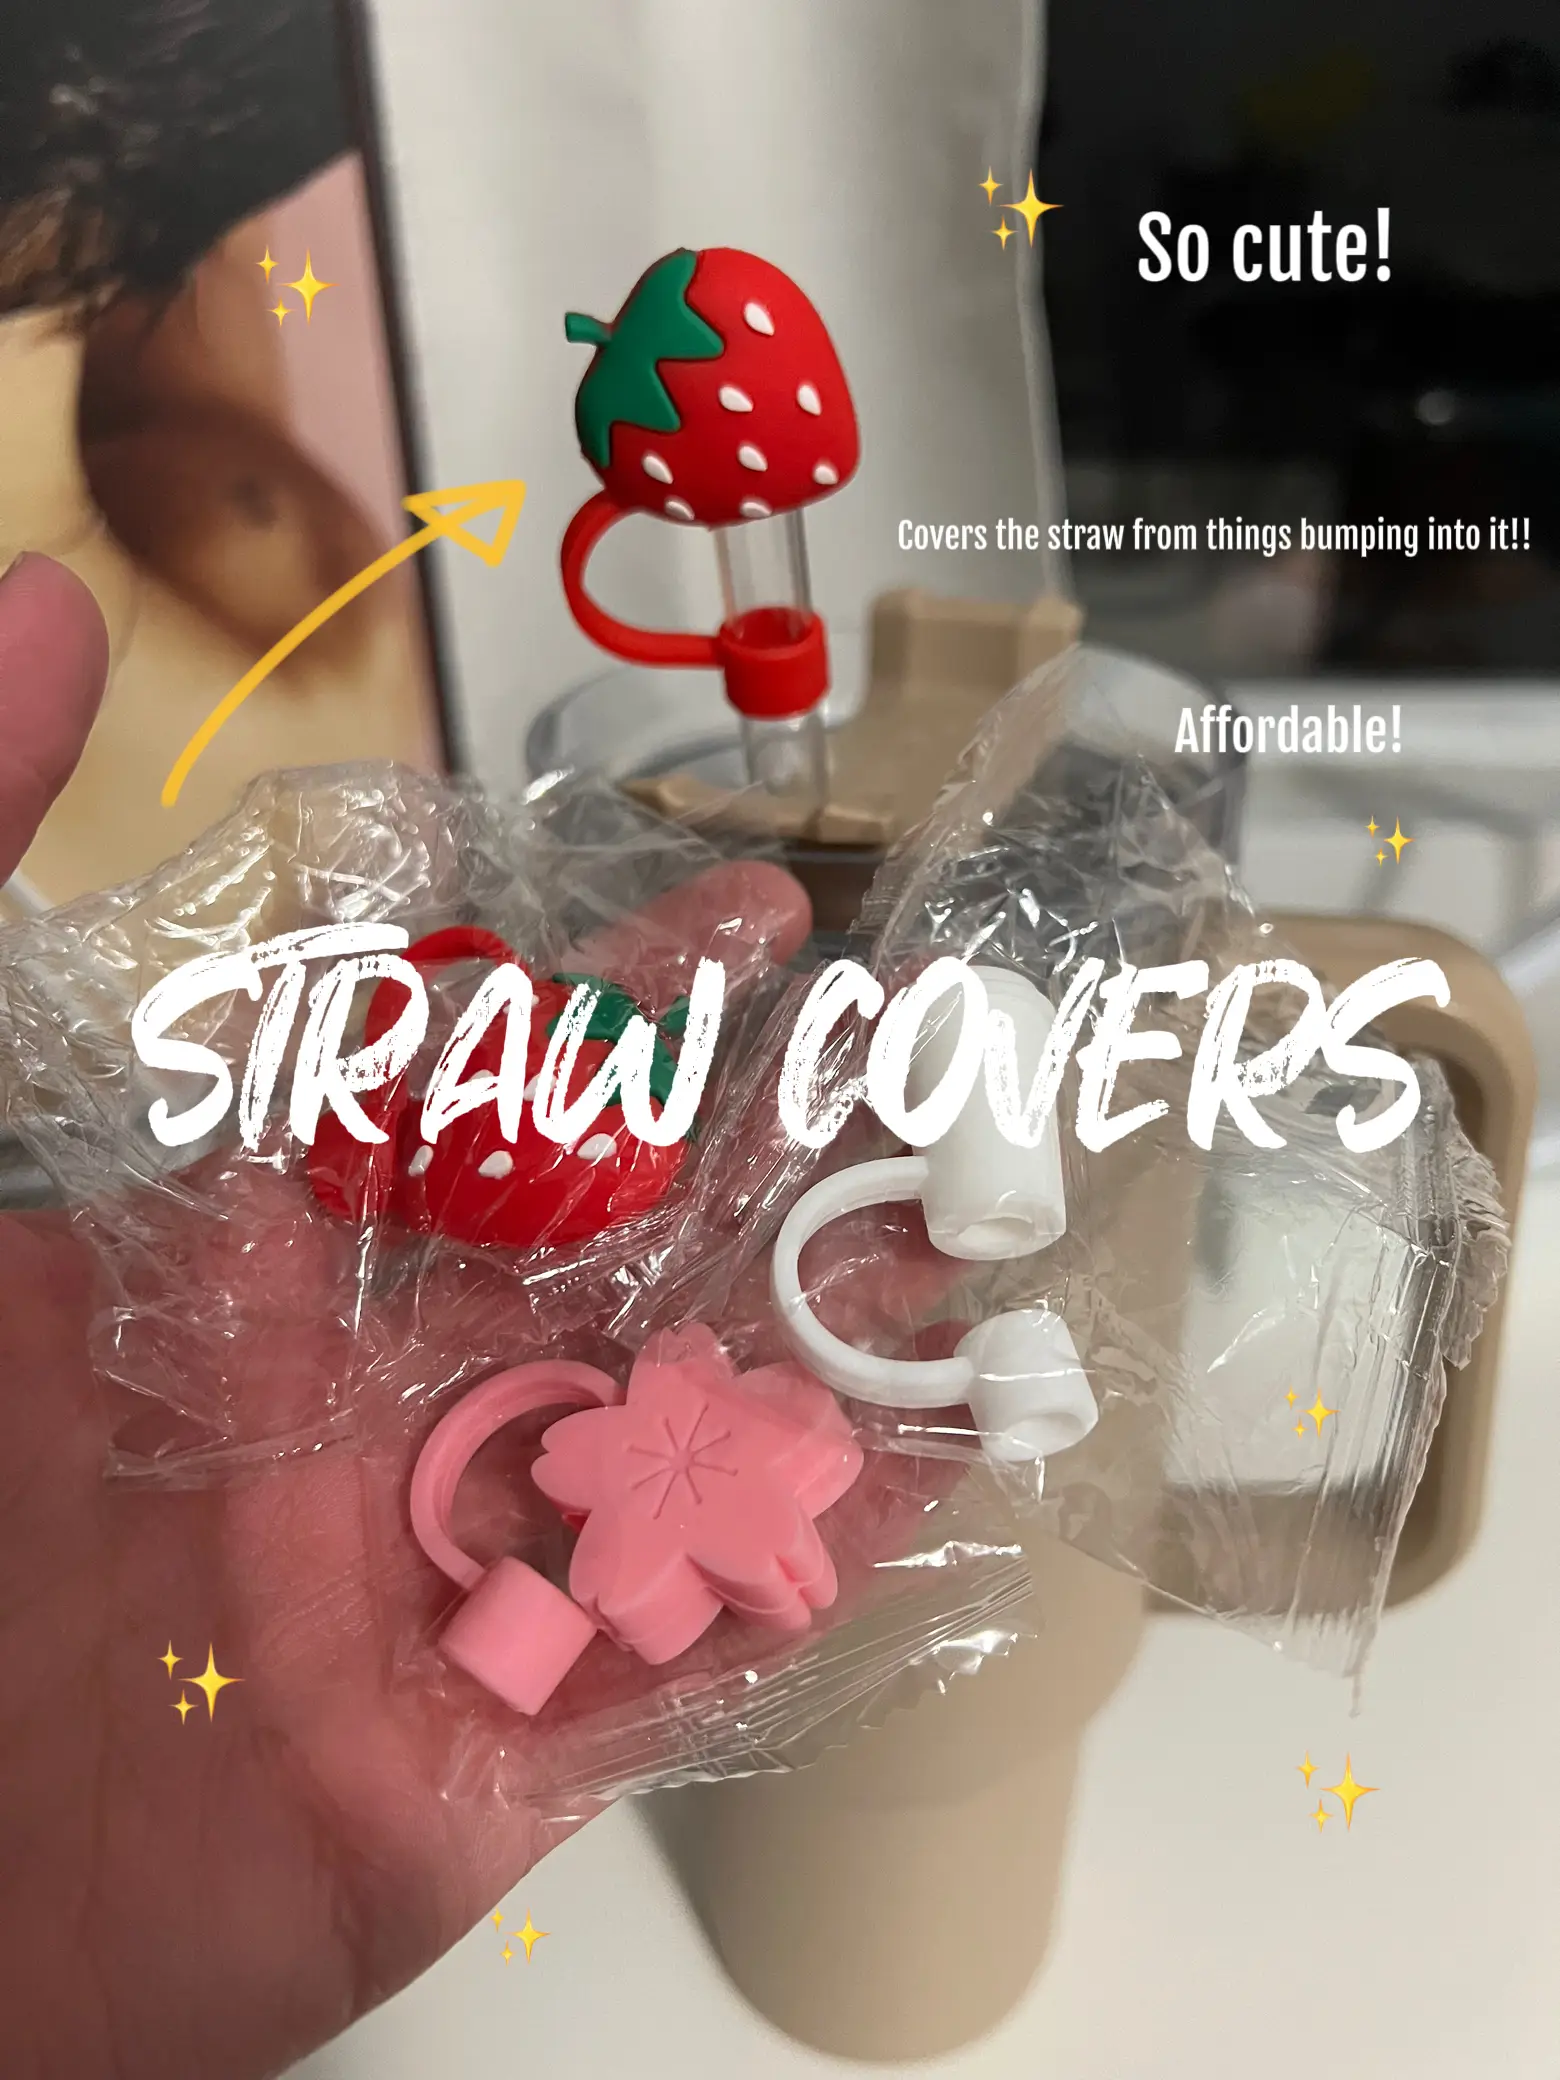 Straw Covers For Stanley Cup Strawberry Straw Cover - Temu